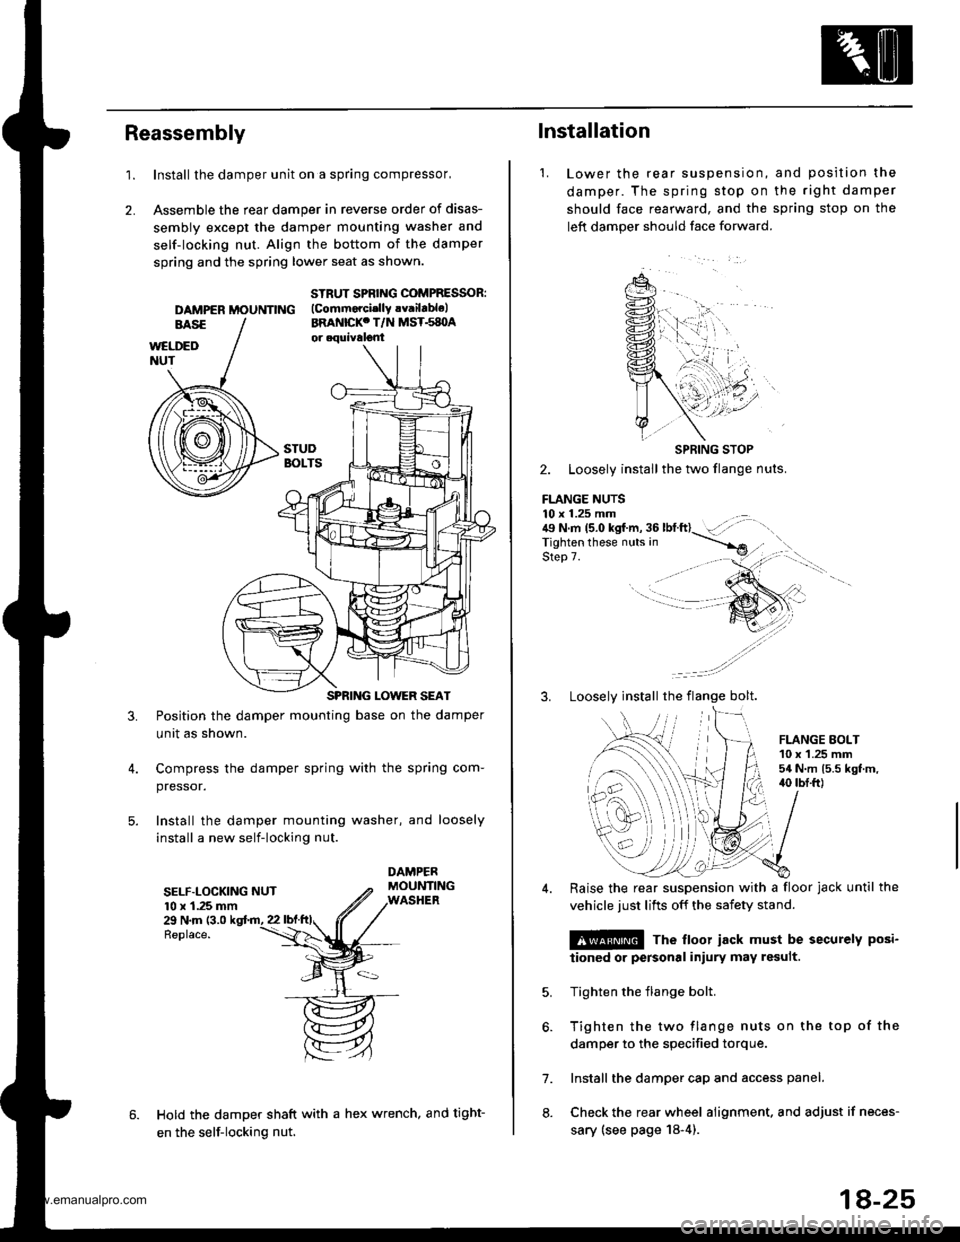 HONDA CR-V 1999 RD1-RD3 / 1.G Workshop Manual 
Reassembly
1.Install the damper unit on a spring compressor,
Assemble the rear damper in reverse order of disas-
sembly except the damper mounting washer and
self-locking nut. Align the bottom of the